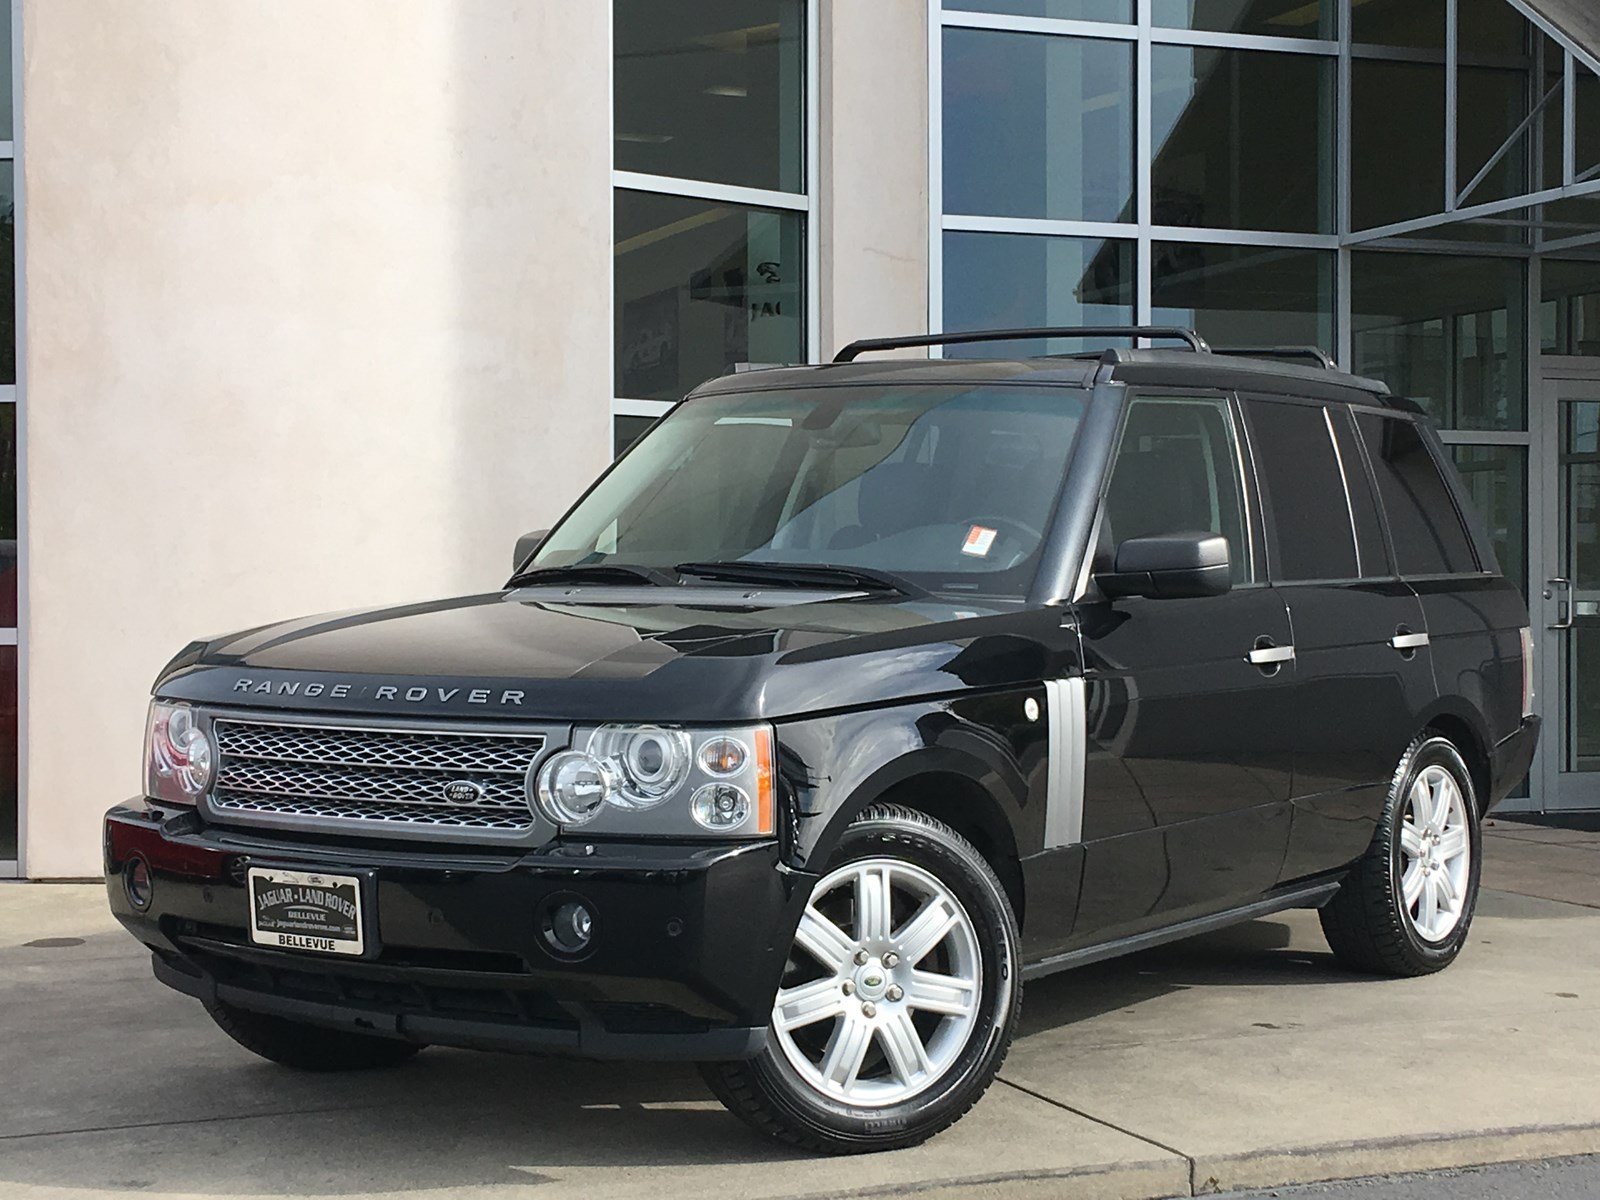 PreOwned 2008 Land Rover Range Rover HSE Sport Utility in